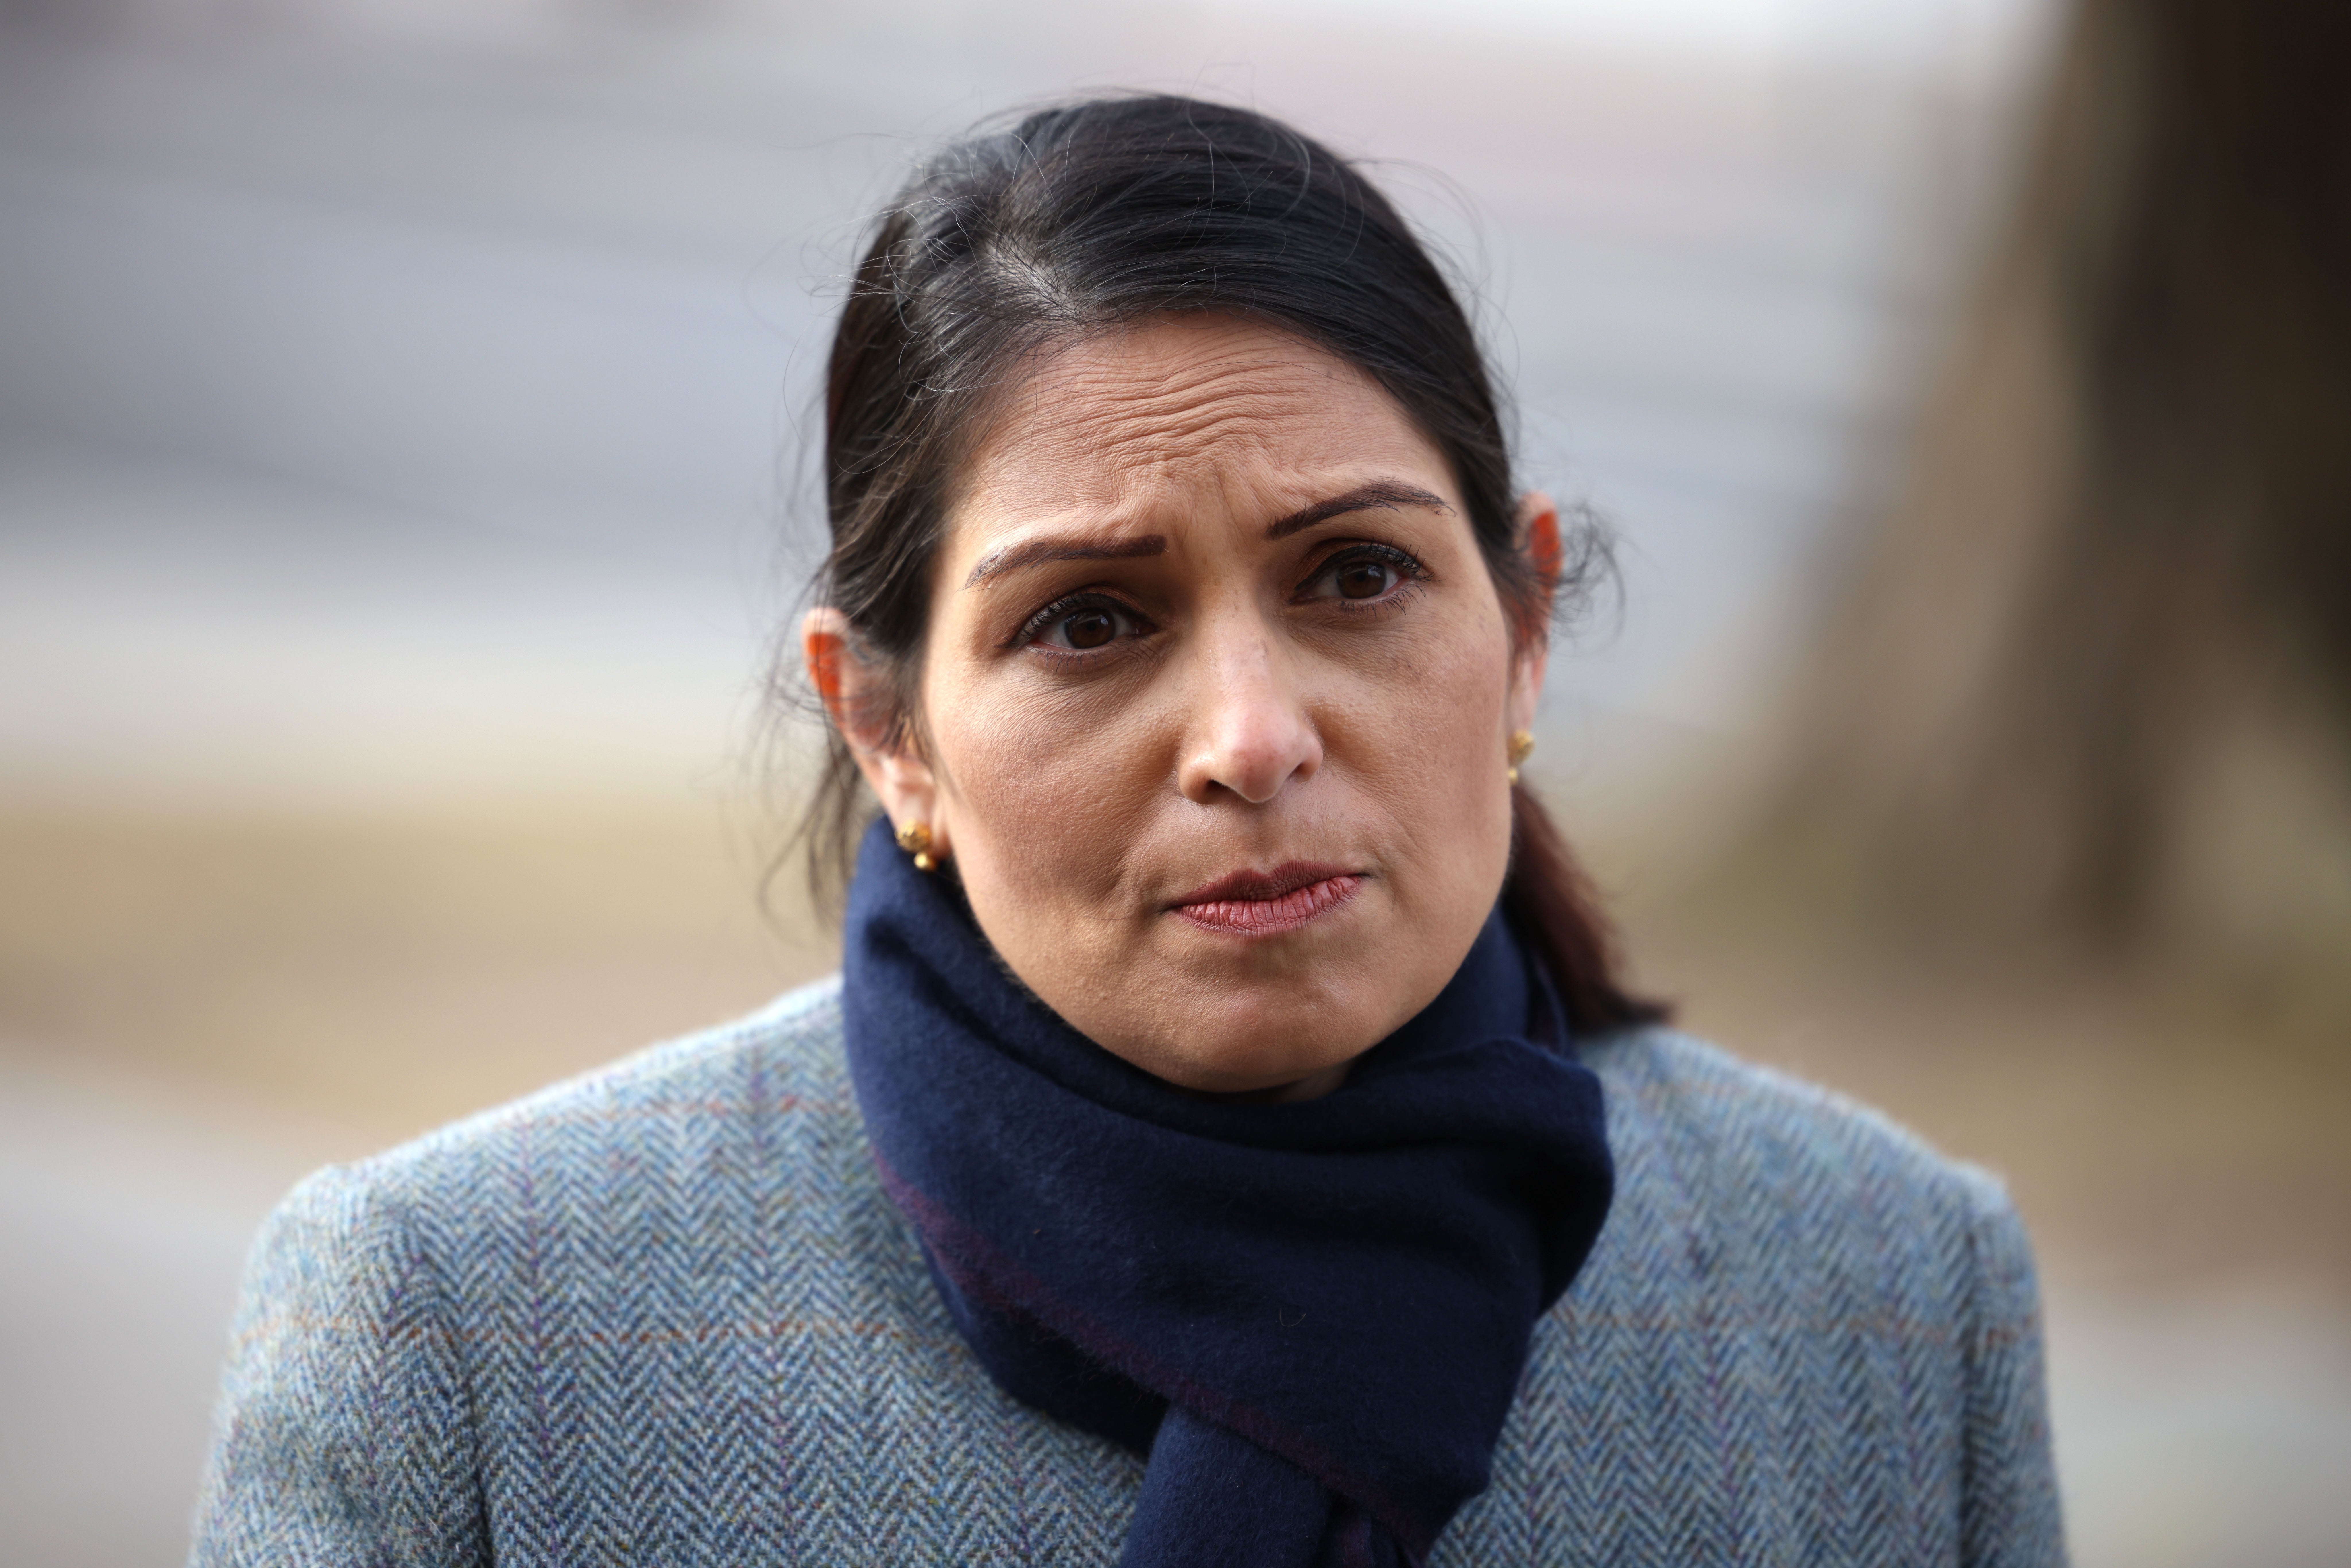 Labour is urging Priti Patel to act urgently